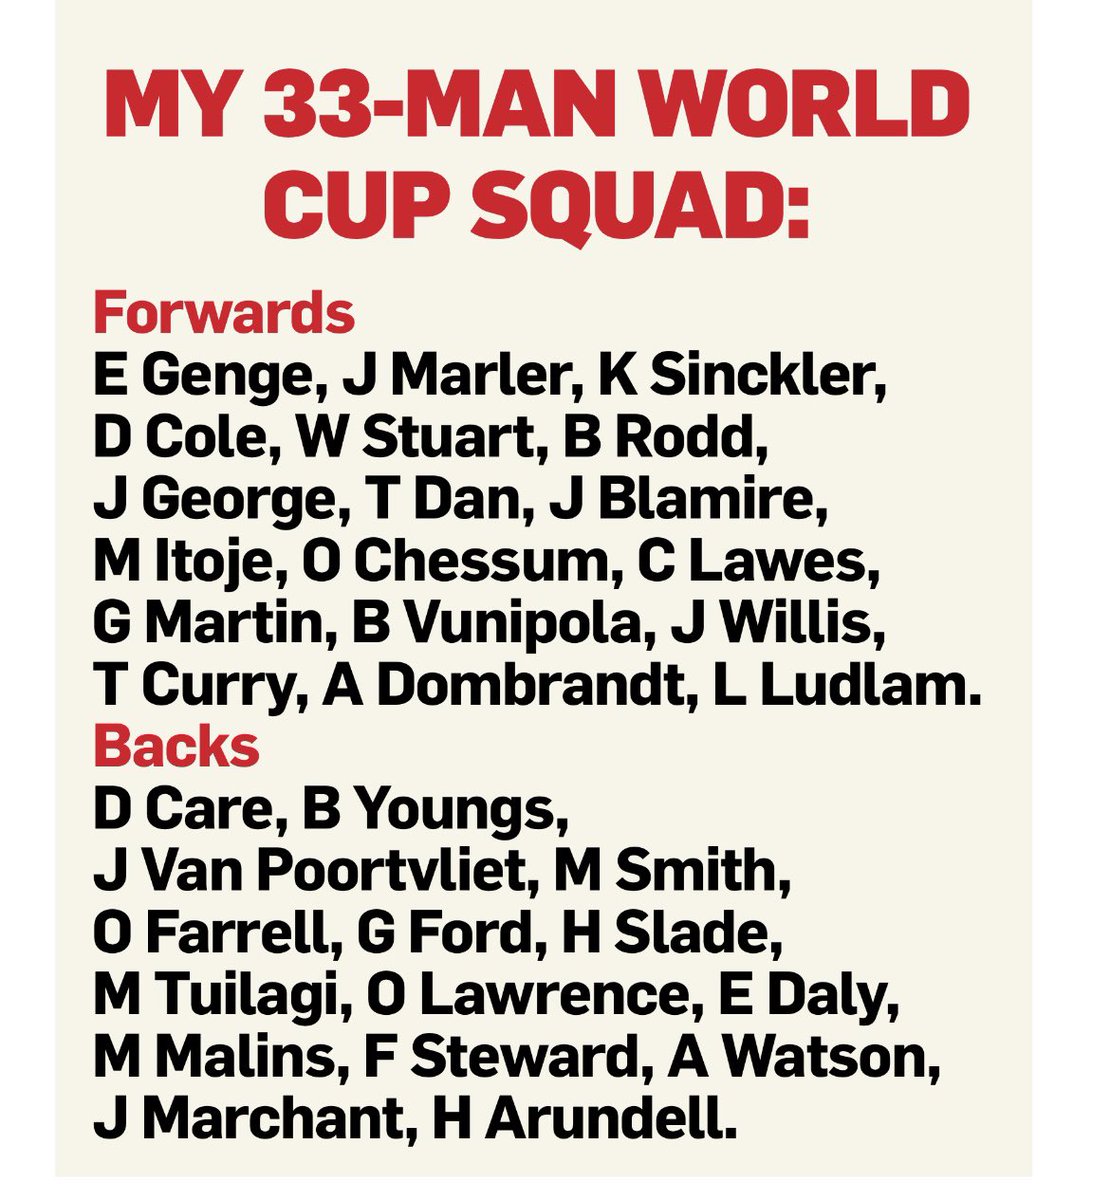 Tried predicting England’s World Cup 33 with @mikebrown_15 after the match. Couple of tweaks this morning: Earl for Dombrandt? Ribbans for Slade?